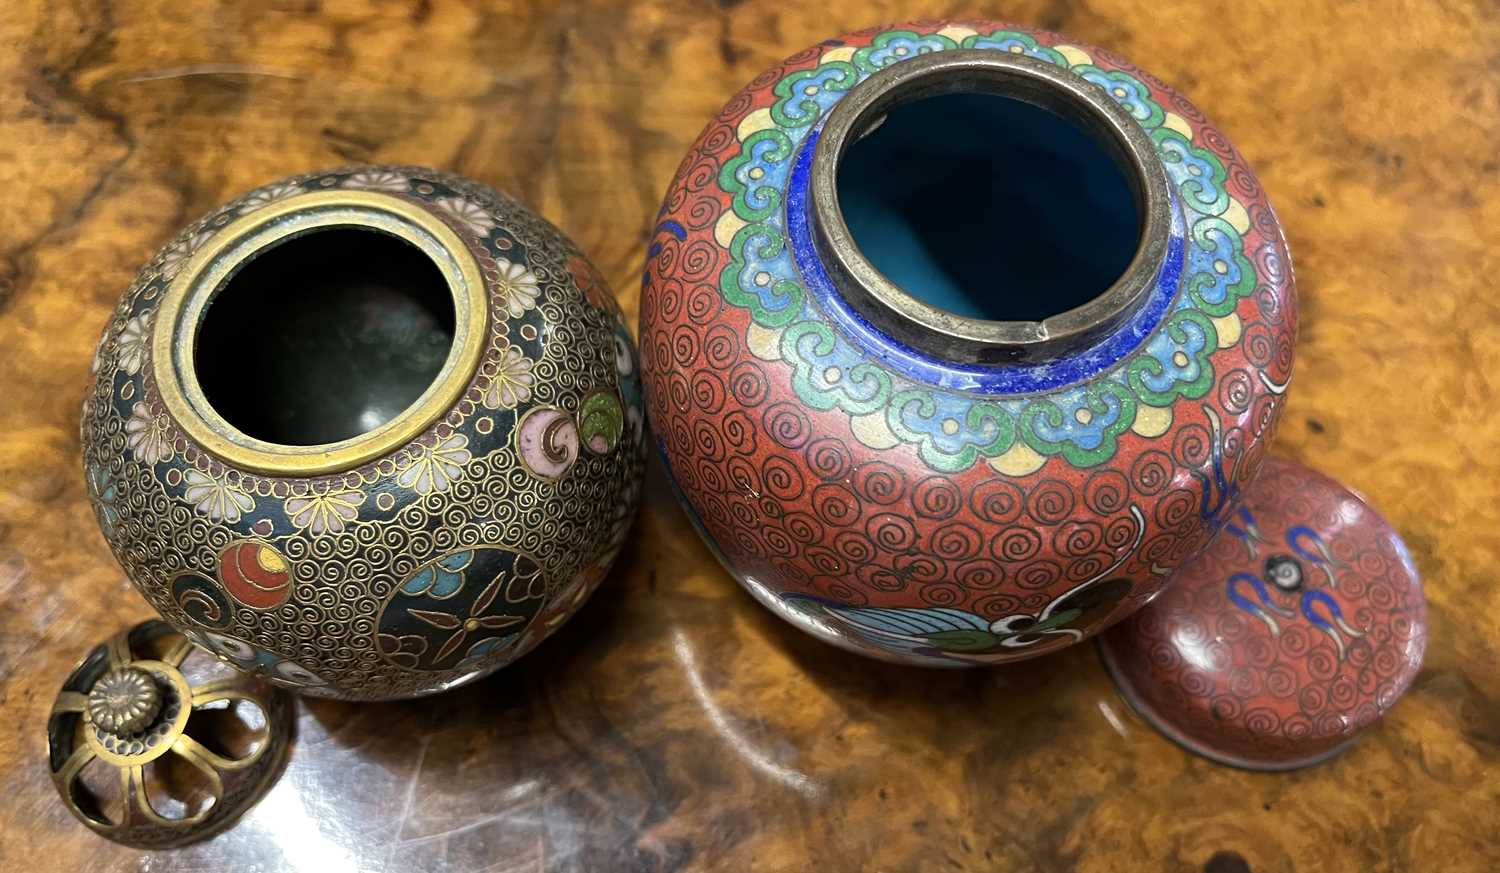 Cloisonne incense burner of globular form with pierced cover together with a small Cloisonne jar and - Image 30 of 36